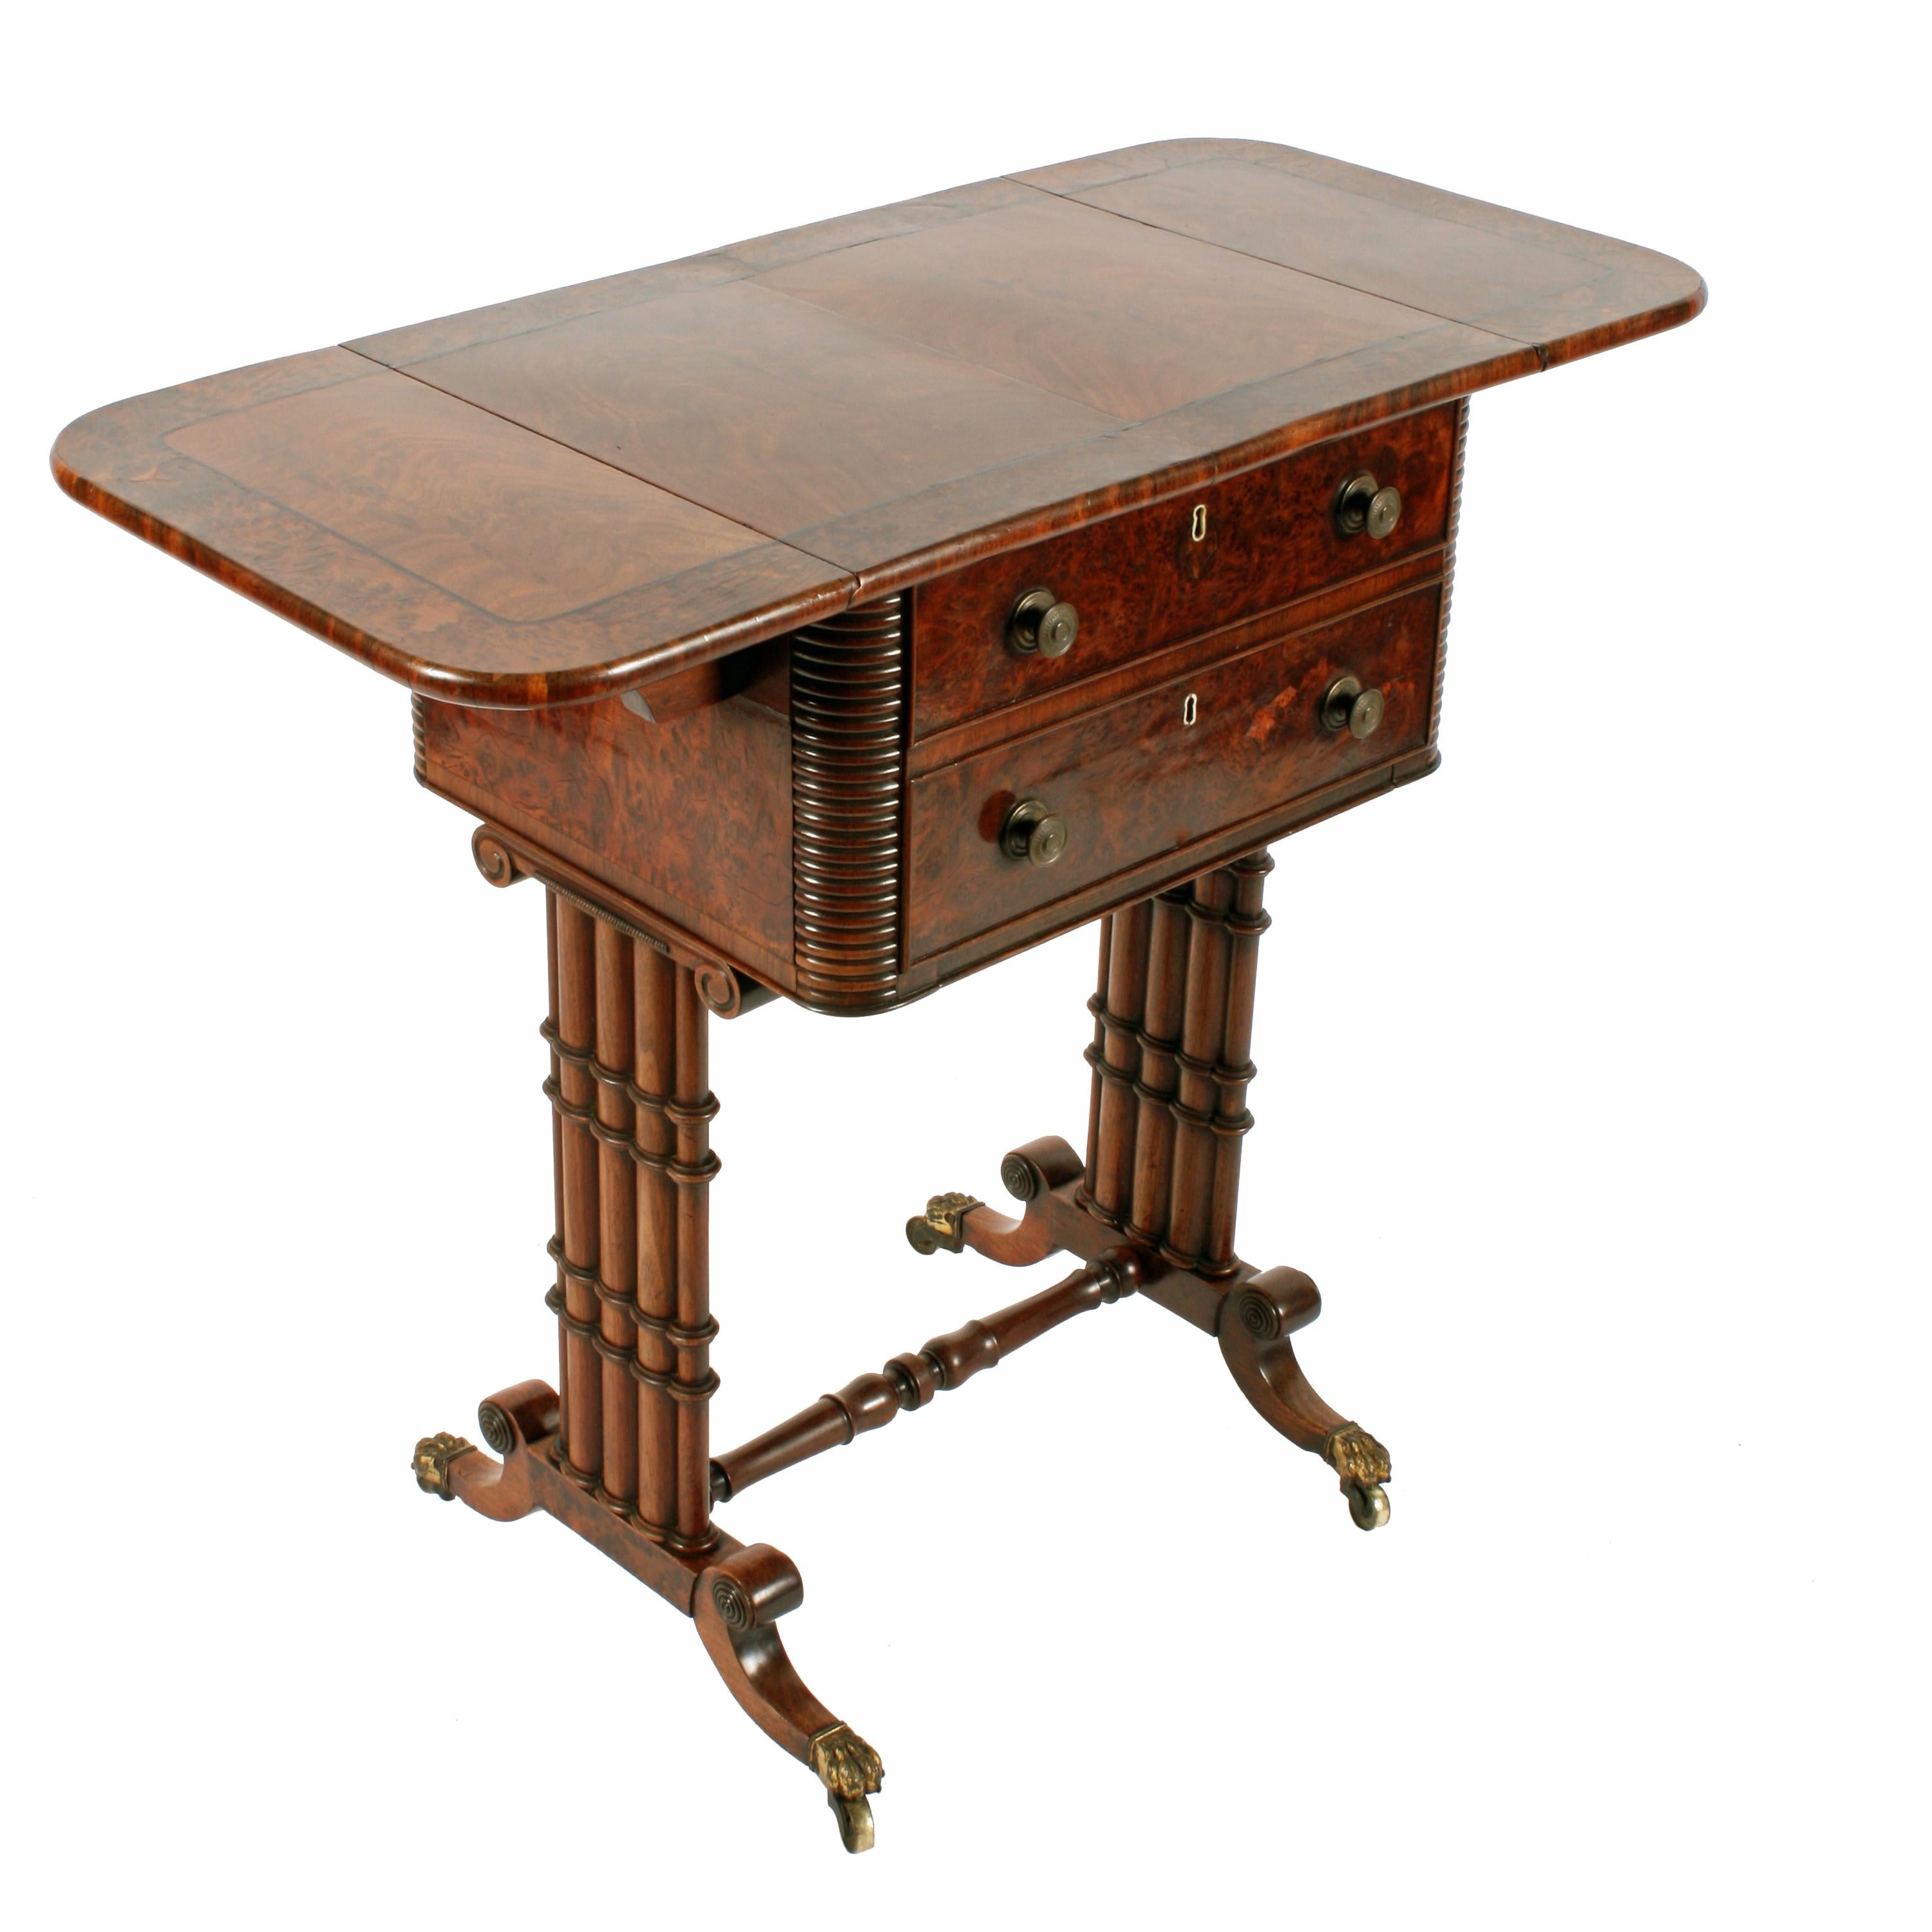 Regency cluster column base side table


An unusual Regency mahogany and amboyna drop leaf one drawer side table.

The table is supported on a pair of cluster column mahogany ends with short sabre legs that have gilt brass claw casters.

The